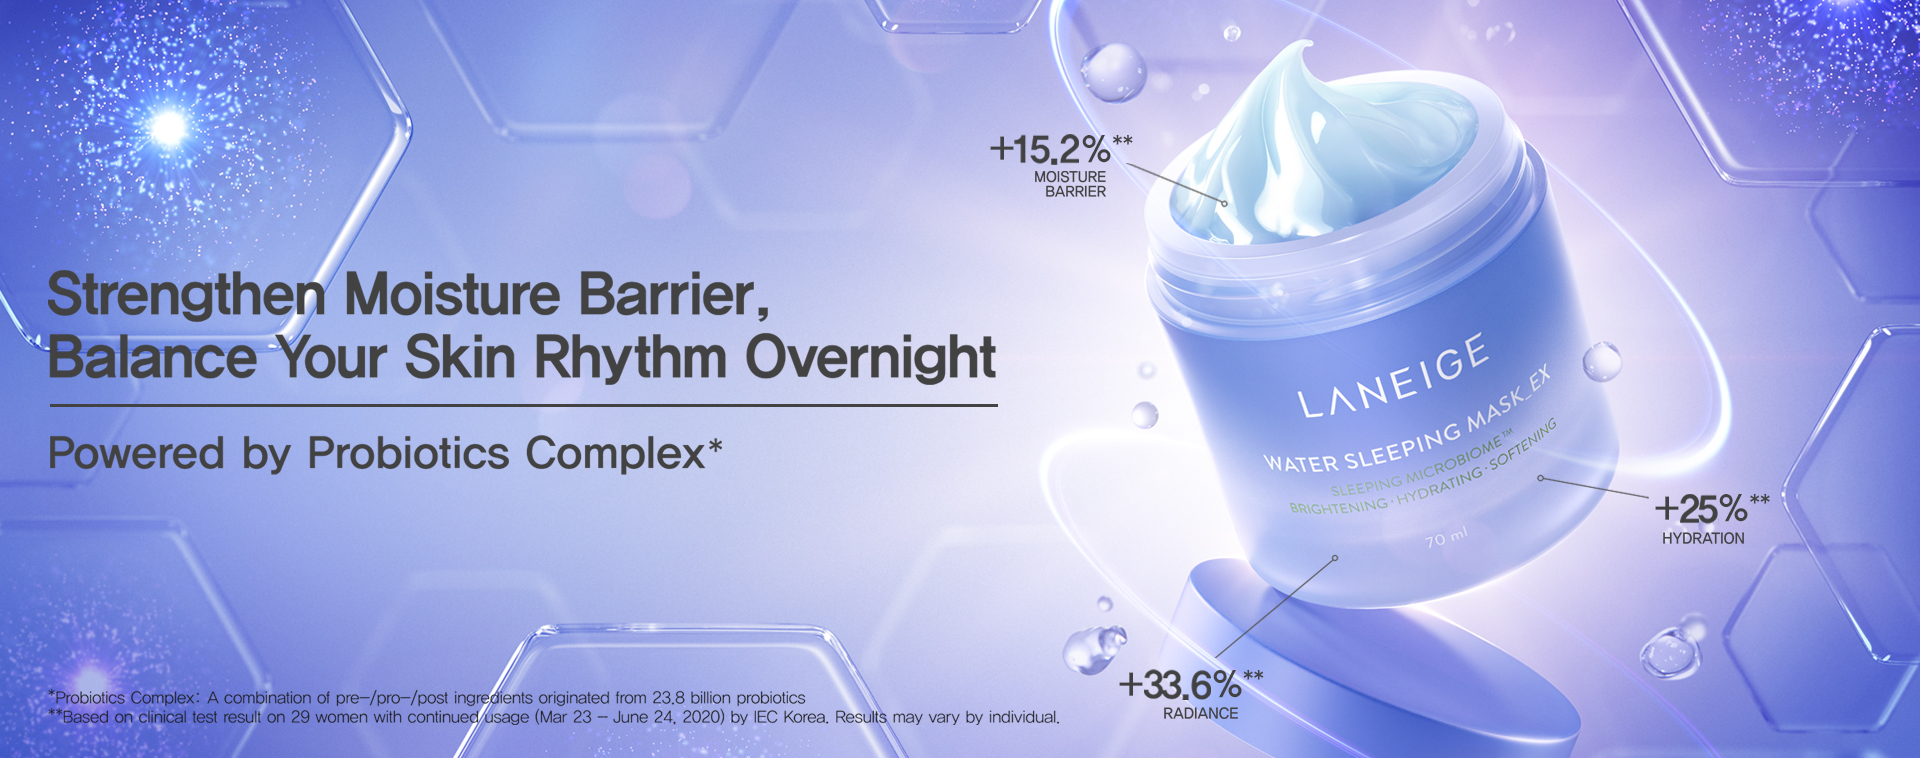 Strengthen Moisture Barrier, Balance Your Skin Rhythm Overnight Powered by Probiotics Complex * *Probiotics Complex: A combination of pre-/pro-/post ingredients originated from 23.8 billion probiotics **Based on clinical test result on 29 women with continued usage (Mar 23 - June 24, 2020) by IEC Korea. Results may vary by individual.